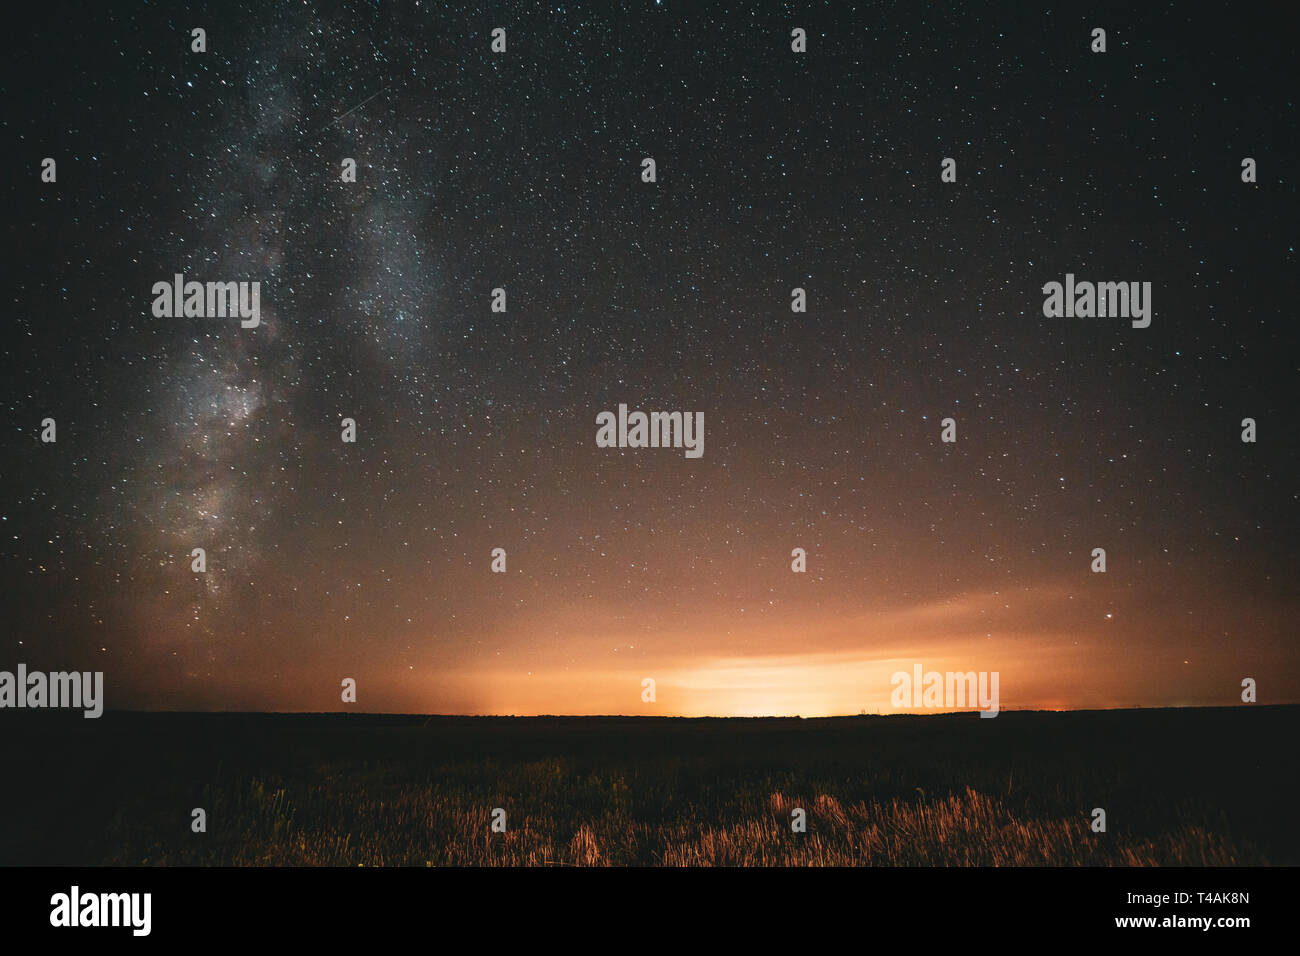 Natural Night Sky Stars With Milky Way Galaxy Above Field Landscape. Real Photo Starry Sky After Sunset Time. Stock Photo